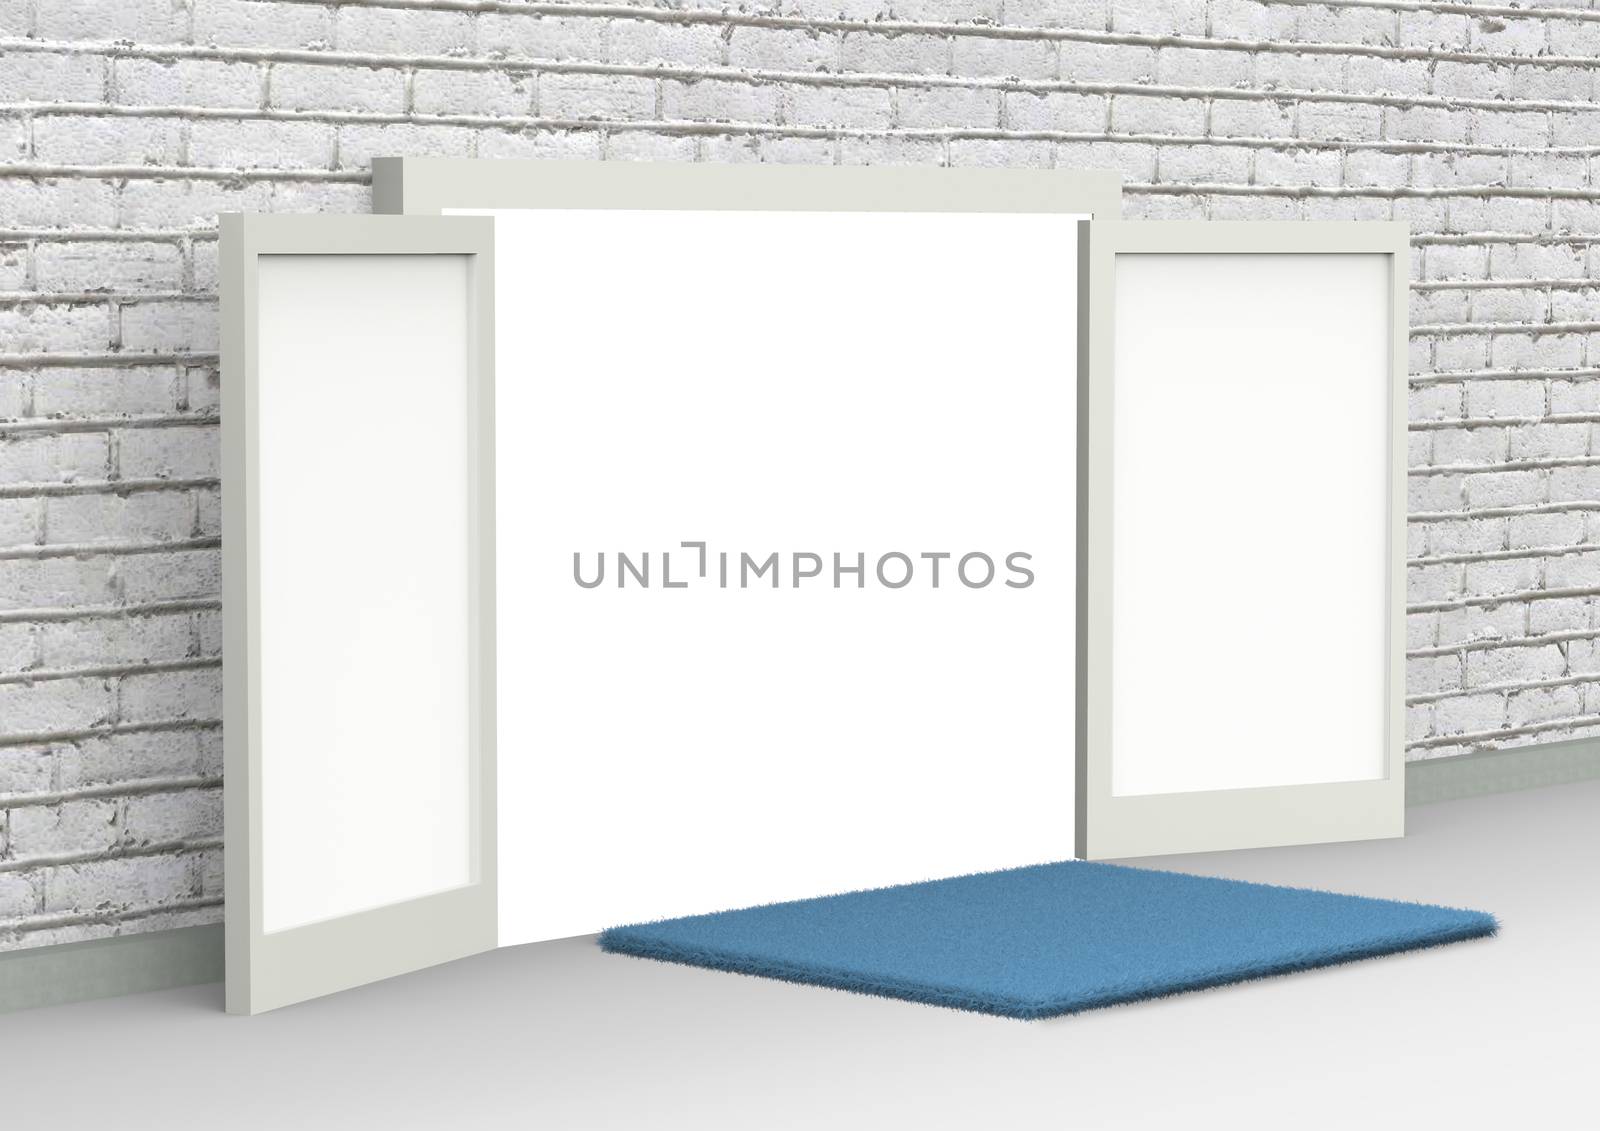 Perspective conceptual image of white opened door. Open gates in a brick wall with blue foot wiping mat on the floor. 3D rendering illustration, side view